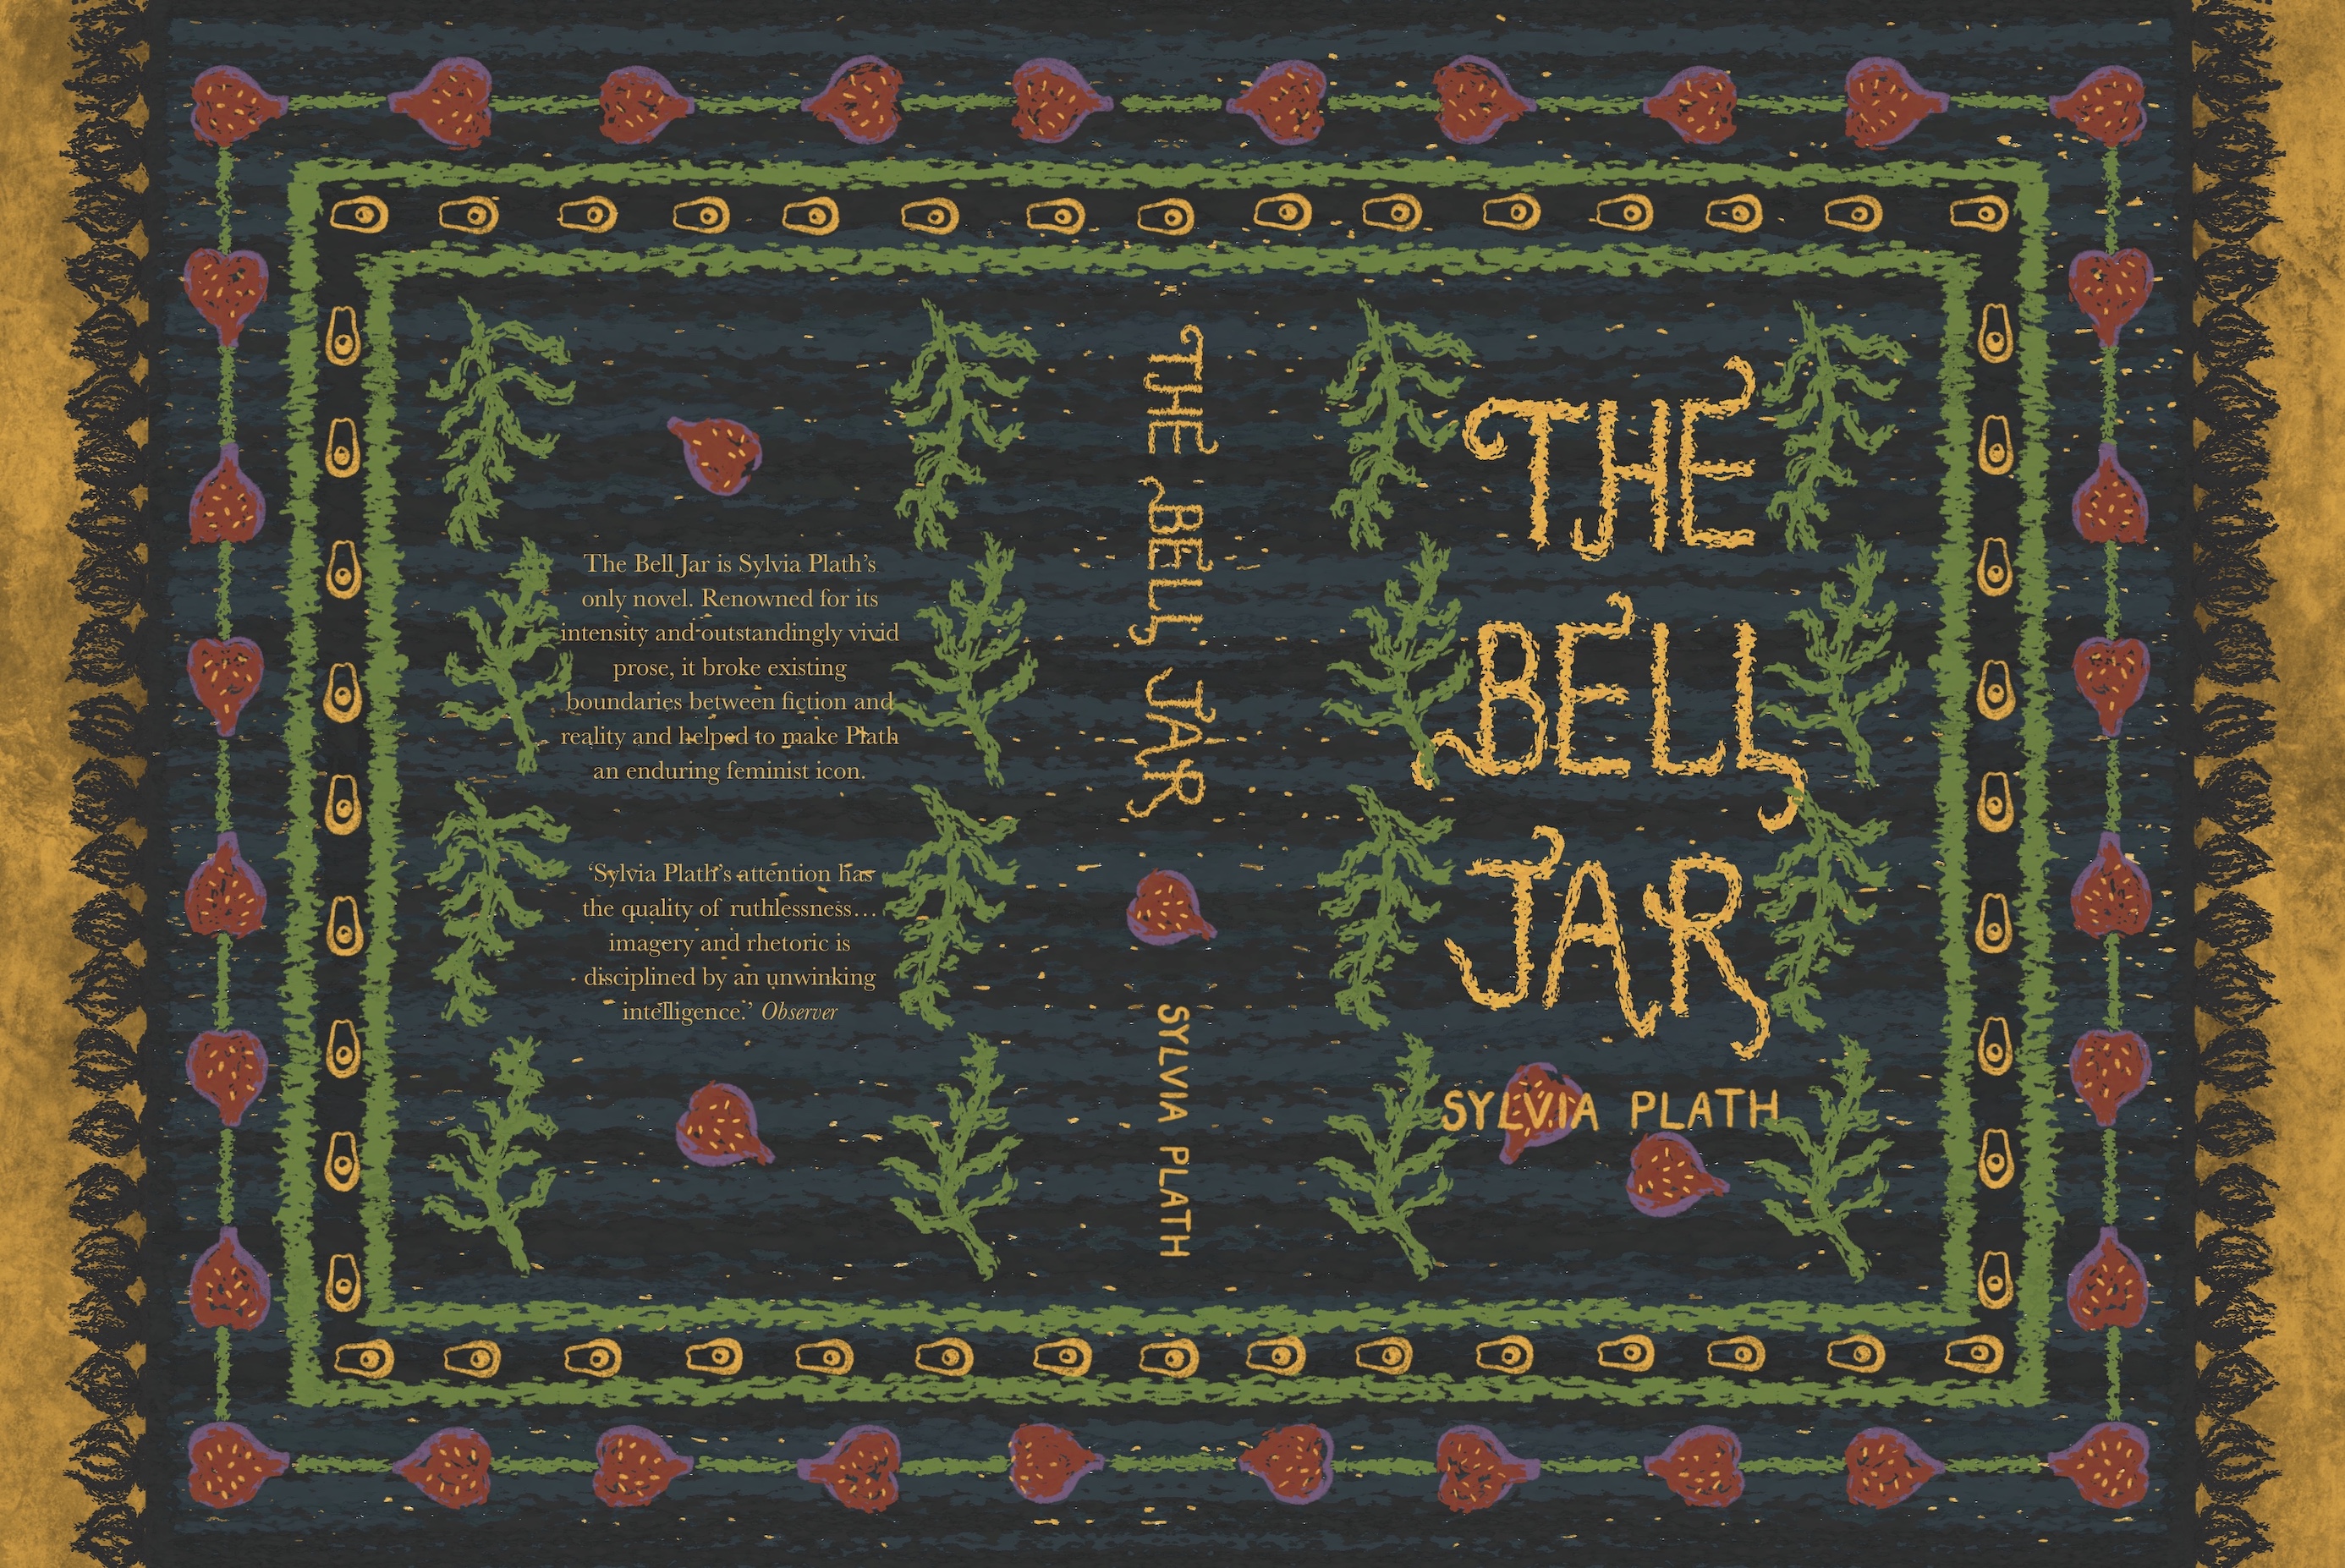 Book Cover redesign of Sylvia Plath's The Bell Jar. Depicting an illustrated rug with avocado, fig, and fern imagery.